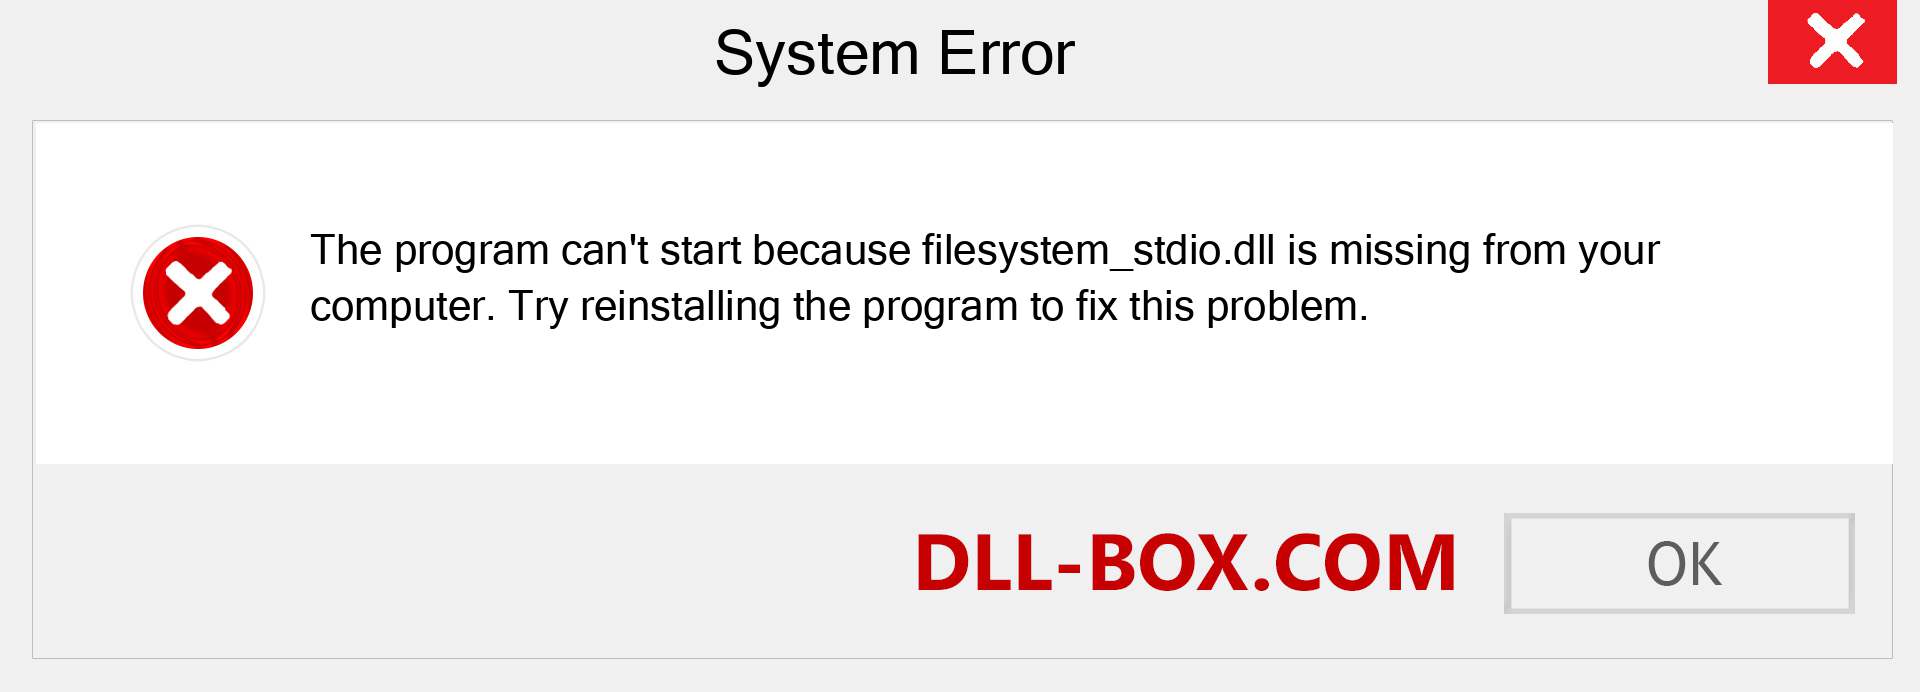  filesystem_stdio.dll file is missing?. Download for Windows 7, 8, 10 - Fix  filesystem_stdio dll Missing Error on Windows, photos, images